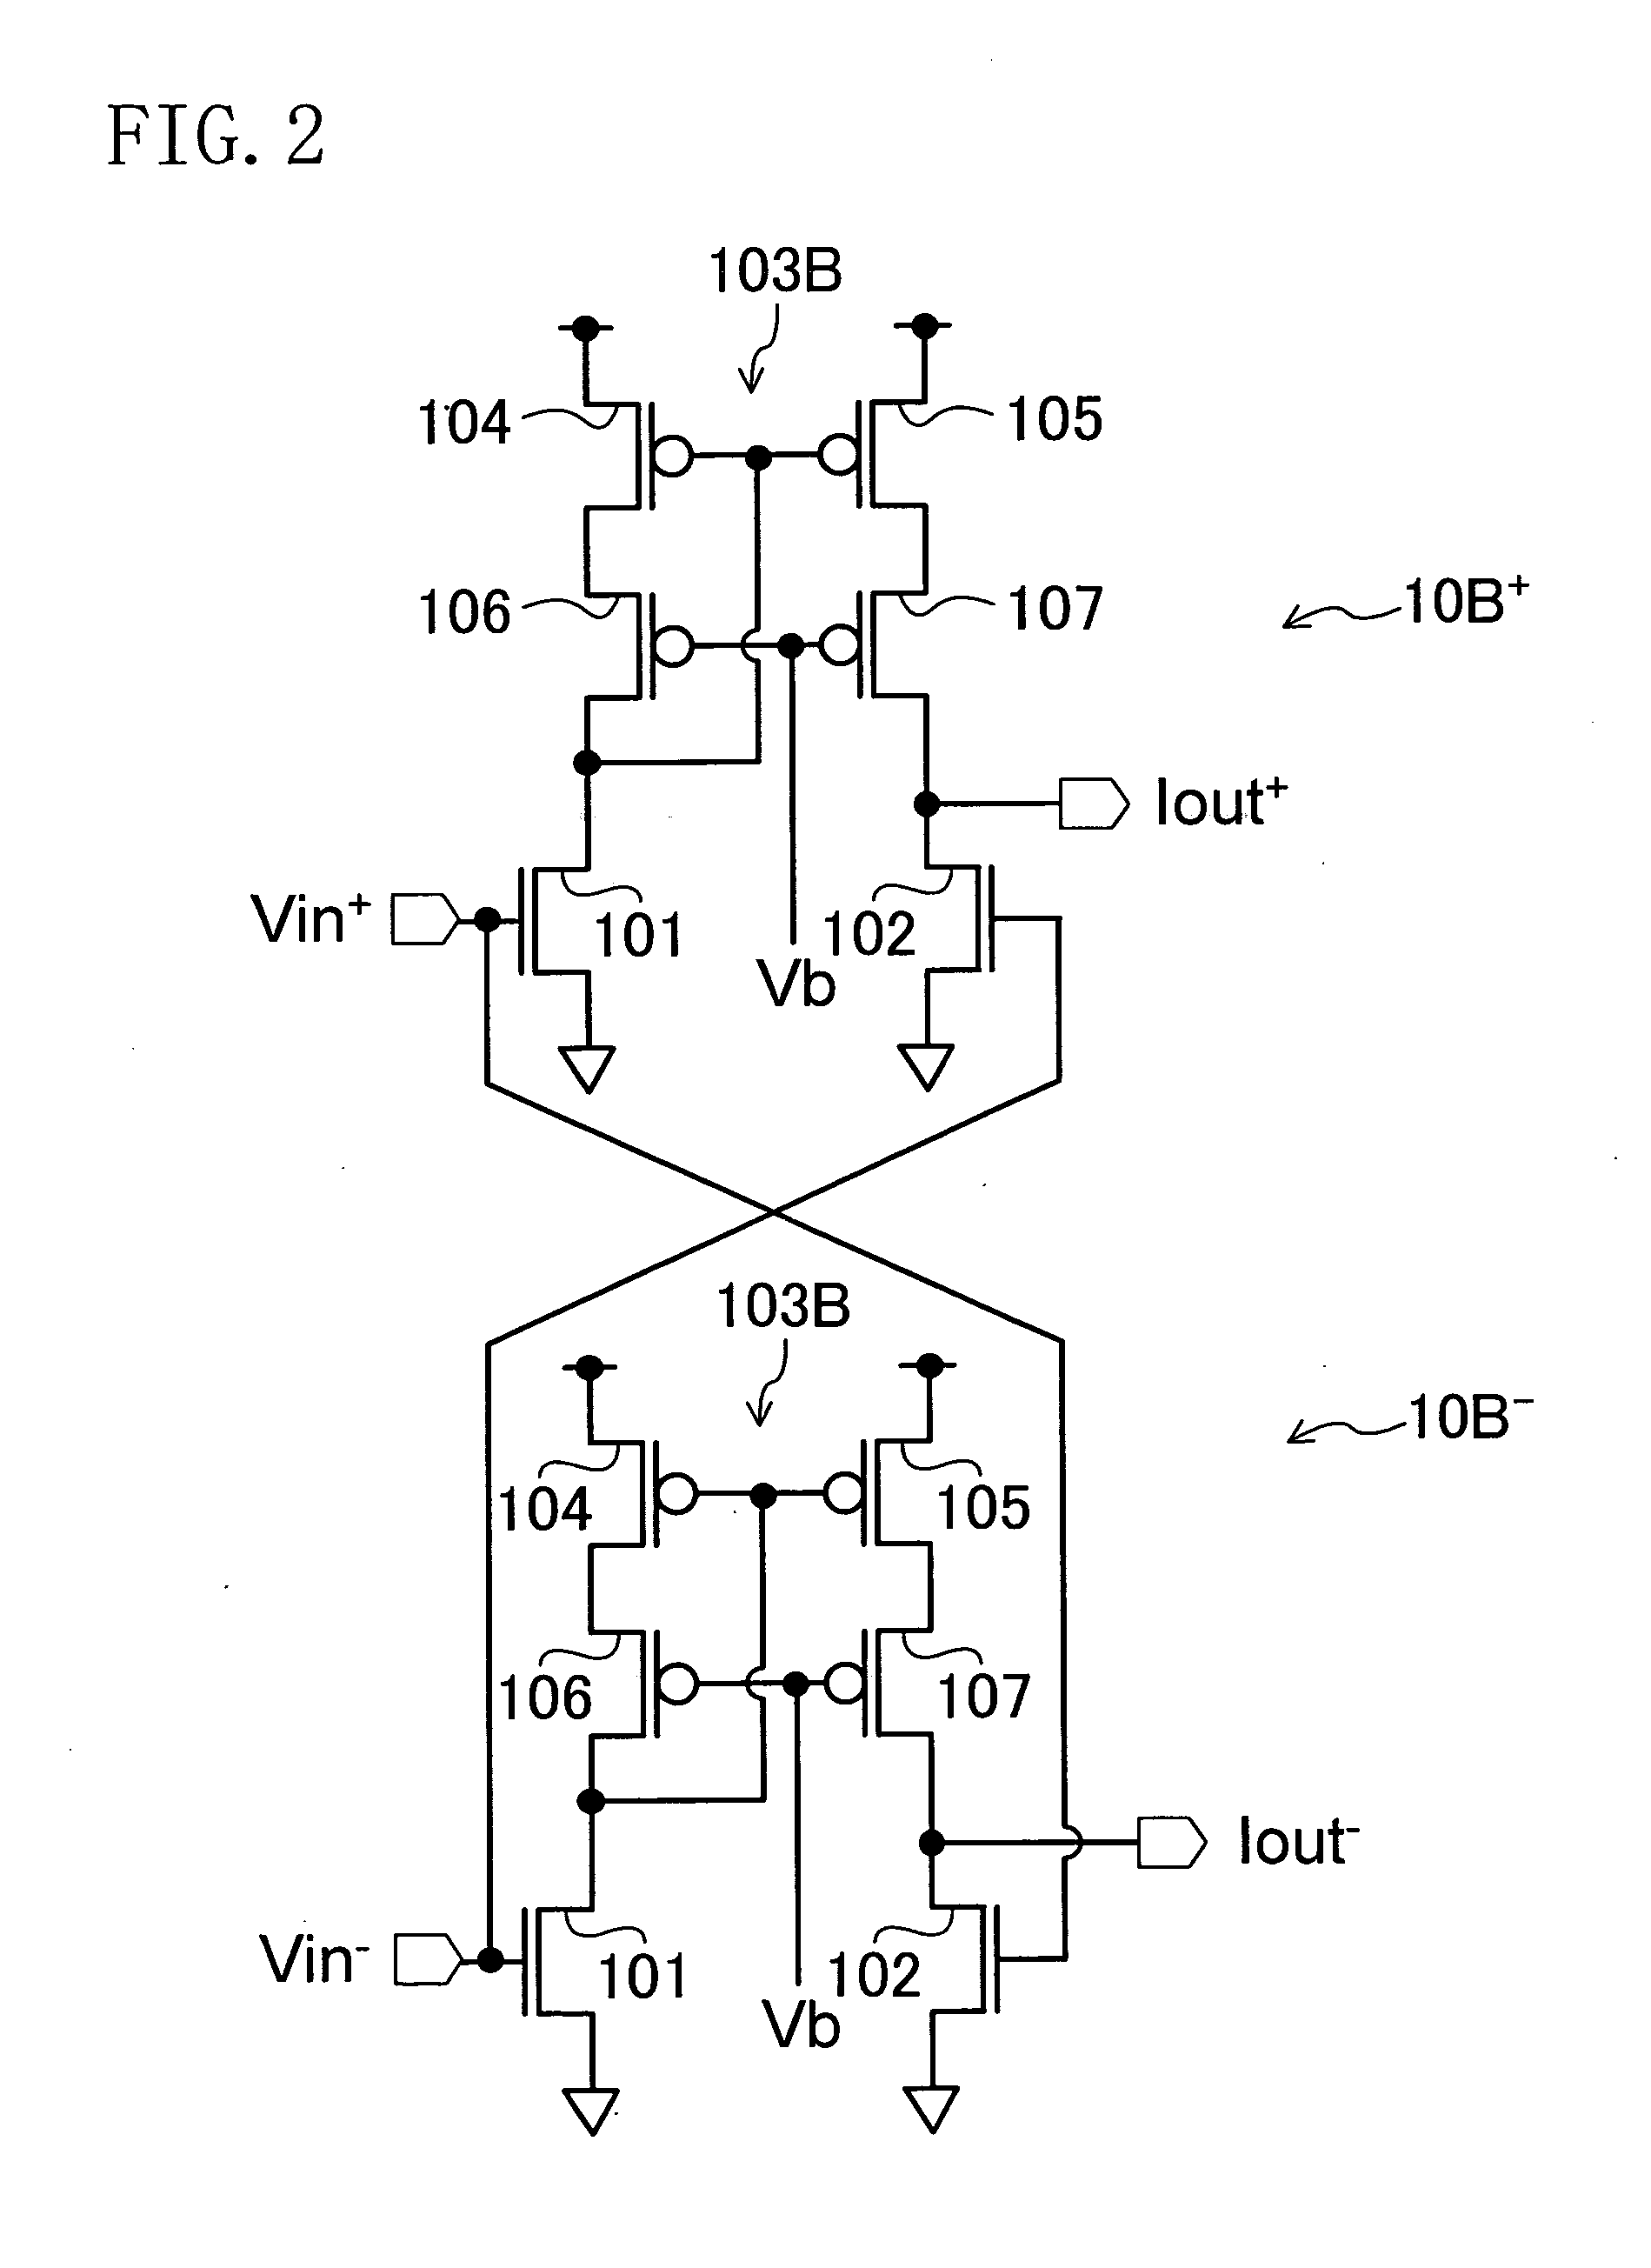 Transconductor, integrator, and filter circuit